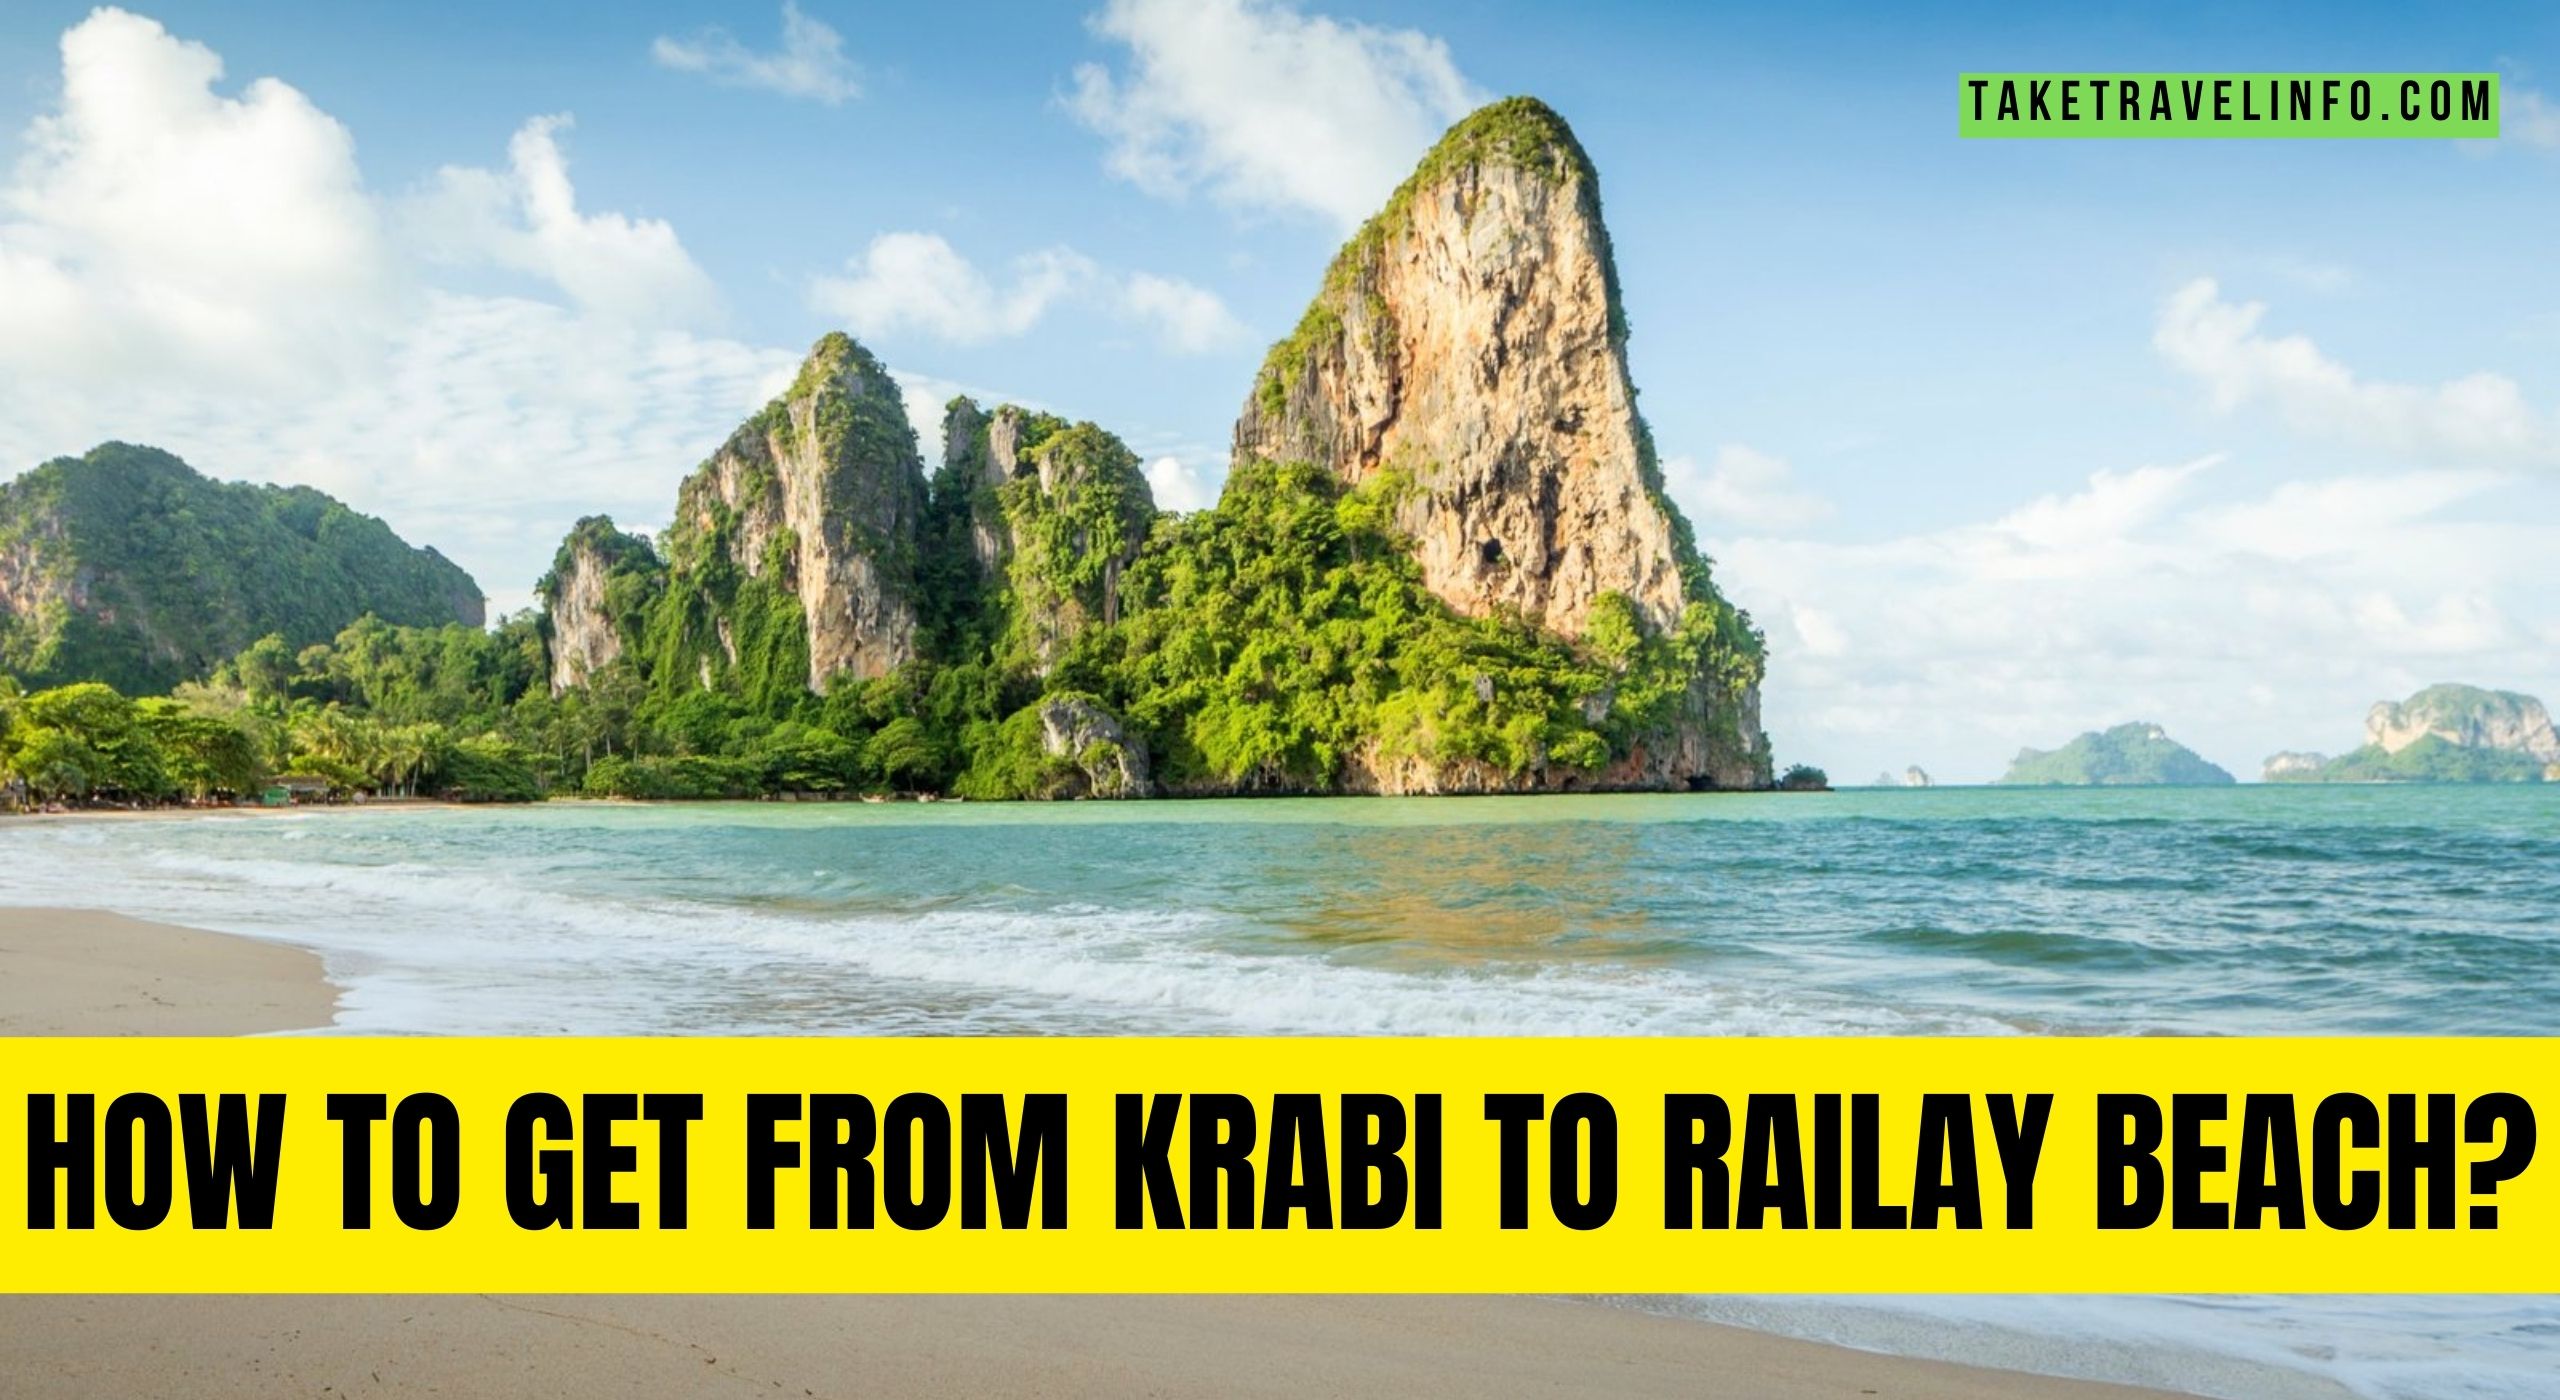 How To Get From Krabi To Railay Beach?